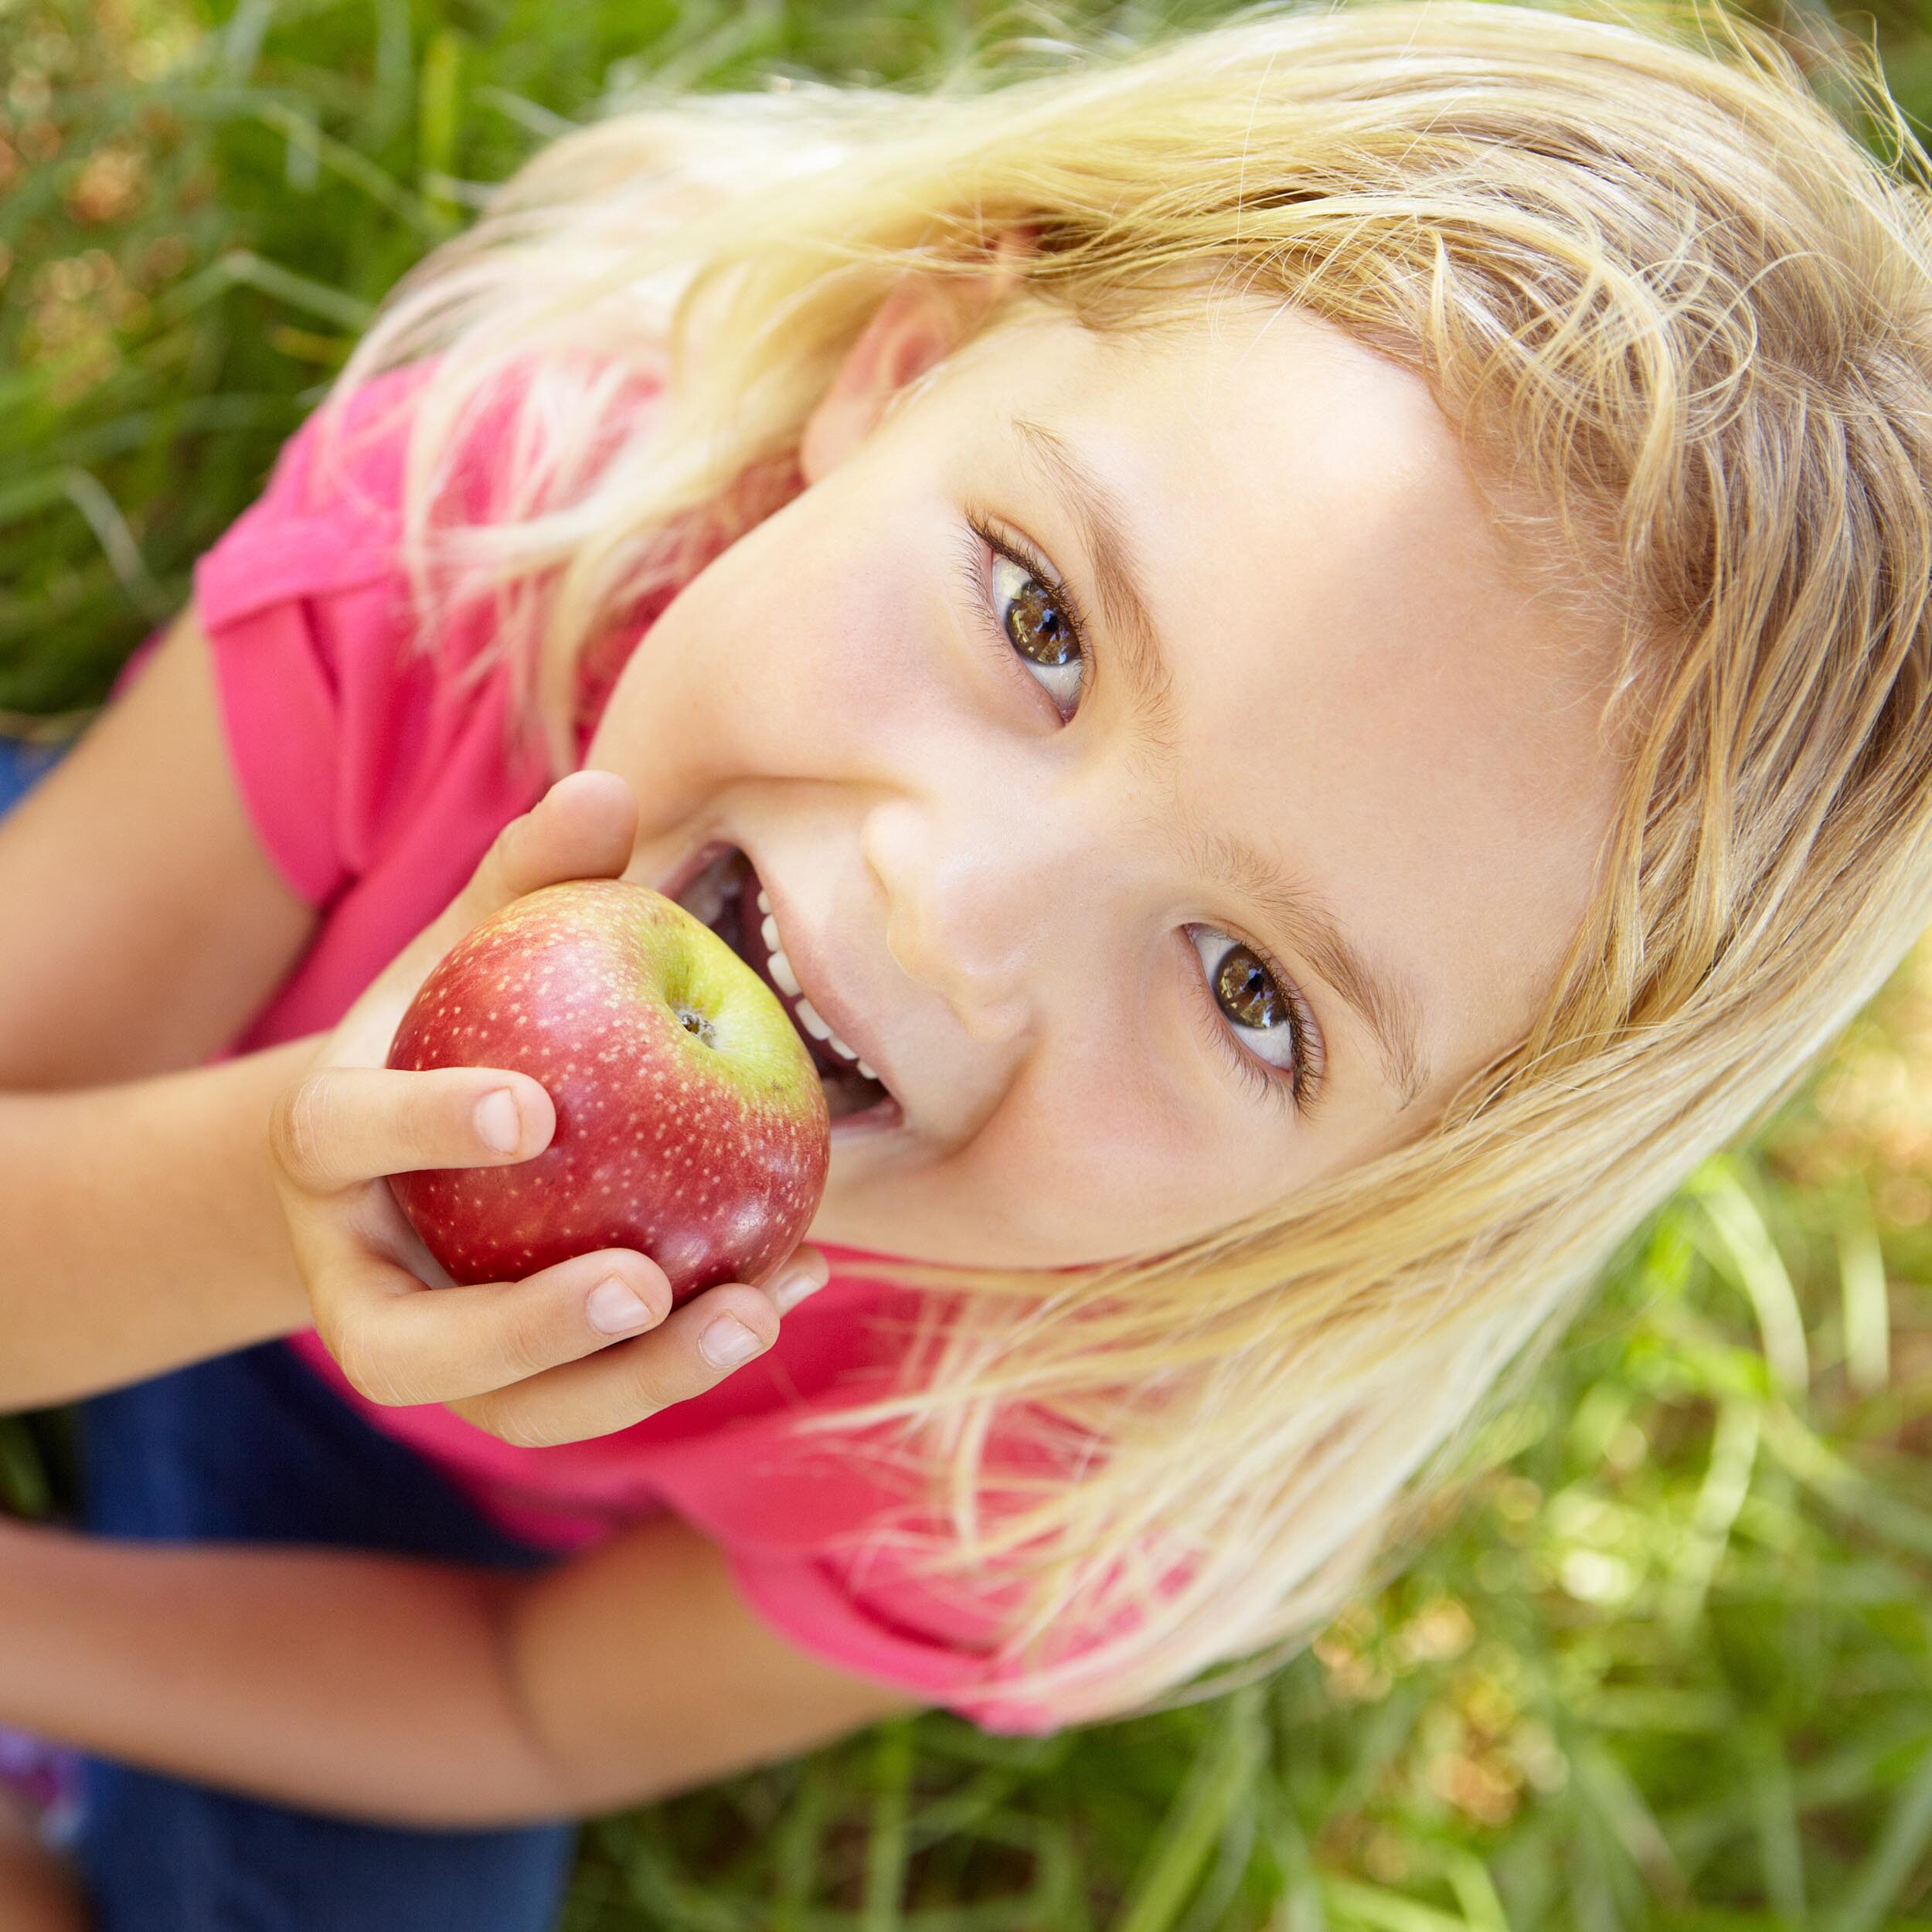 A young girl enjoying an apple while sitting in the grass.